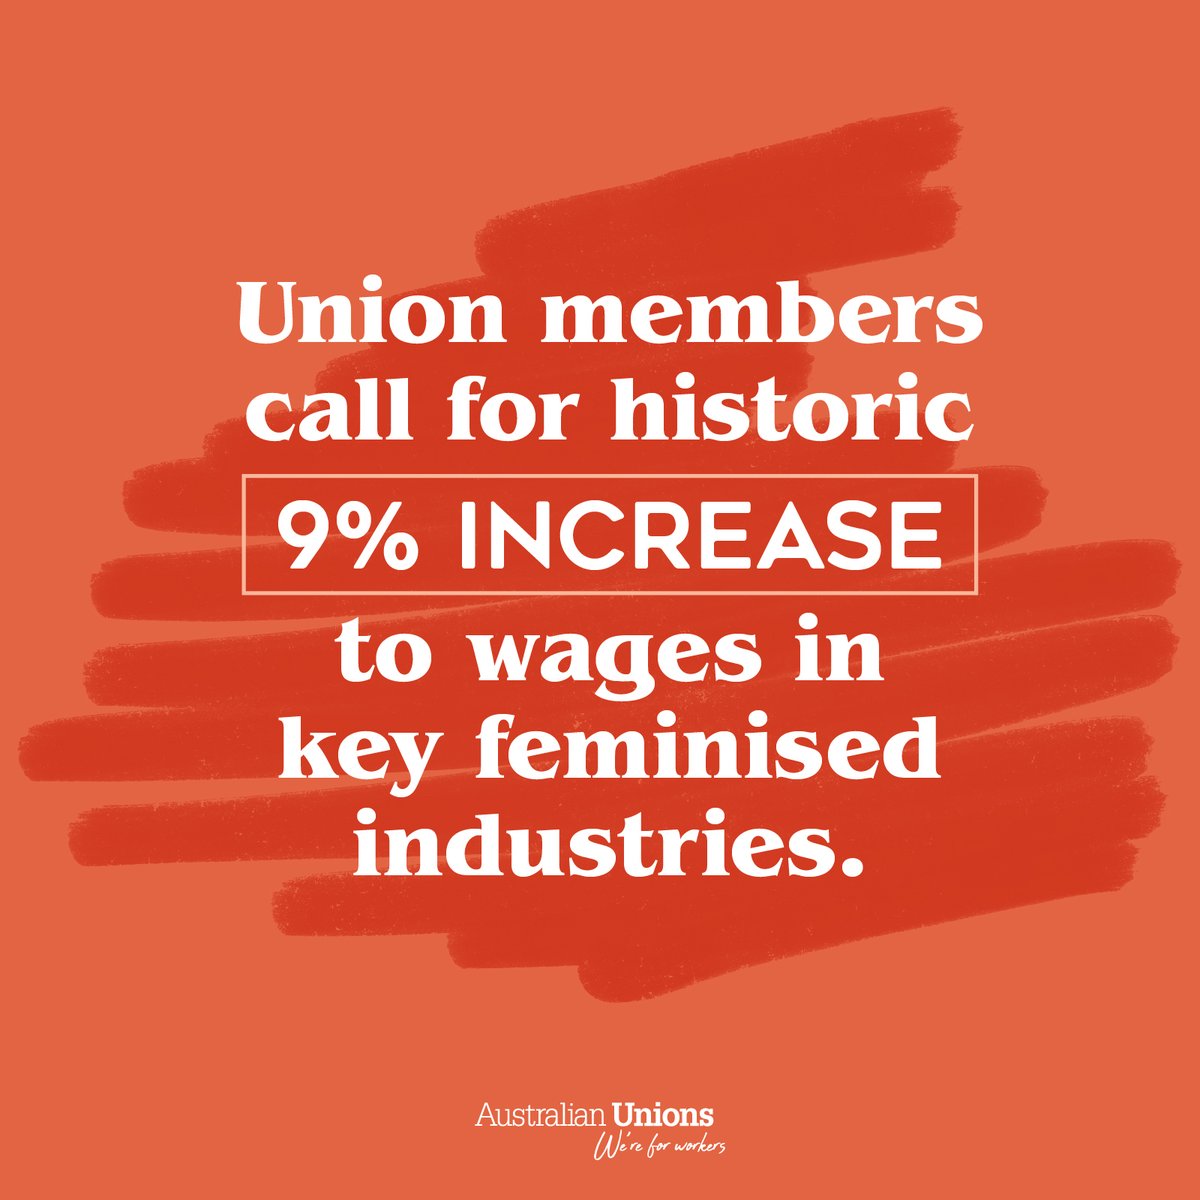 At this year’s Annual Wage Review, union members are calling for an additional 4% – on top of a 5% increase for award-reliant workers – for key industries traditionally dominated by women. It’s a pivotal step in valuing the critical work done by these workers for our community.